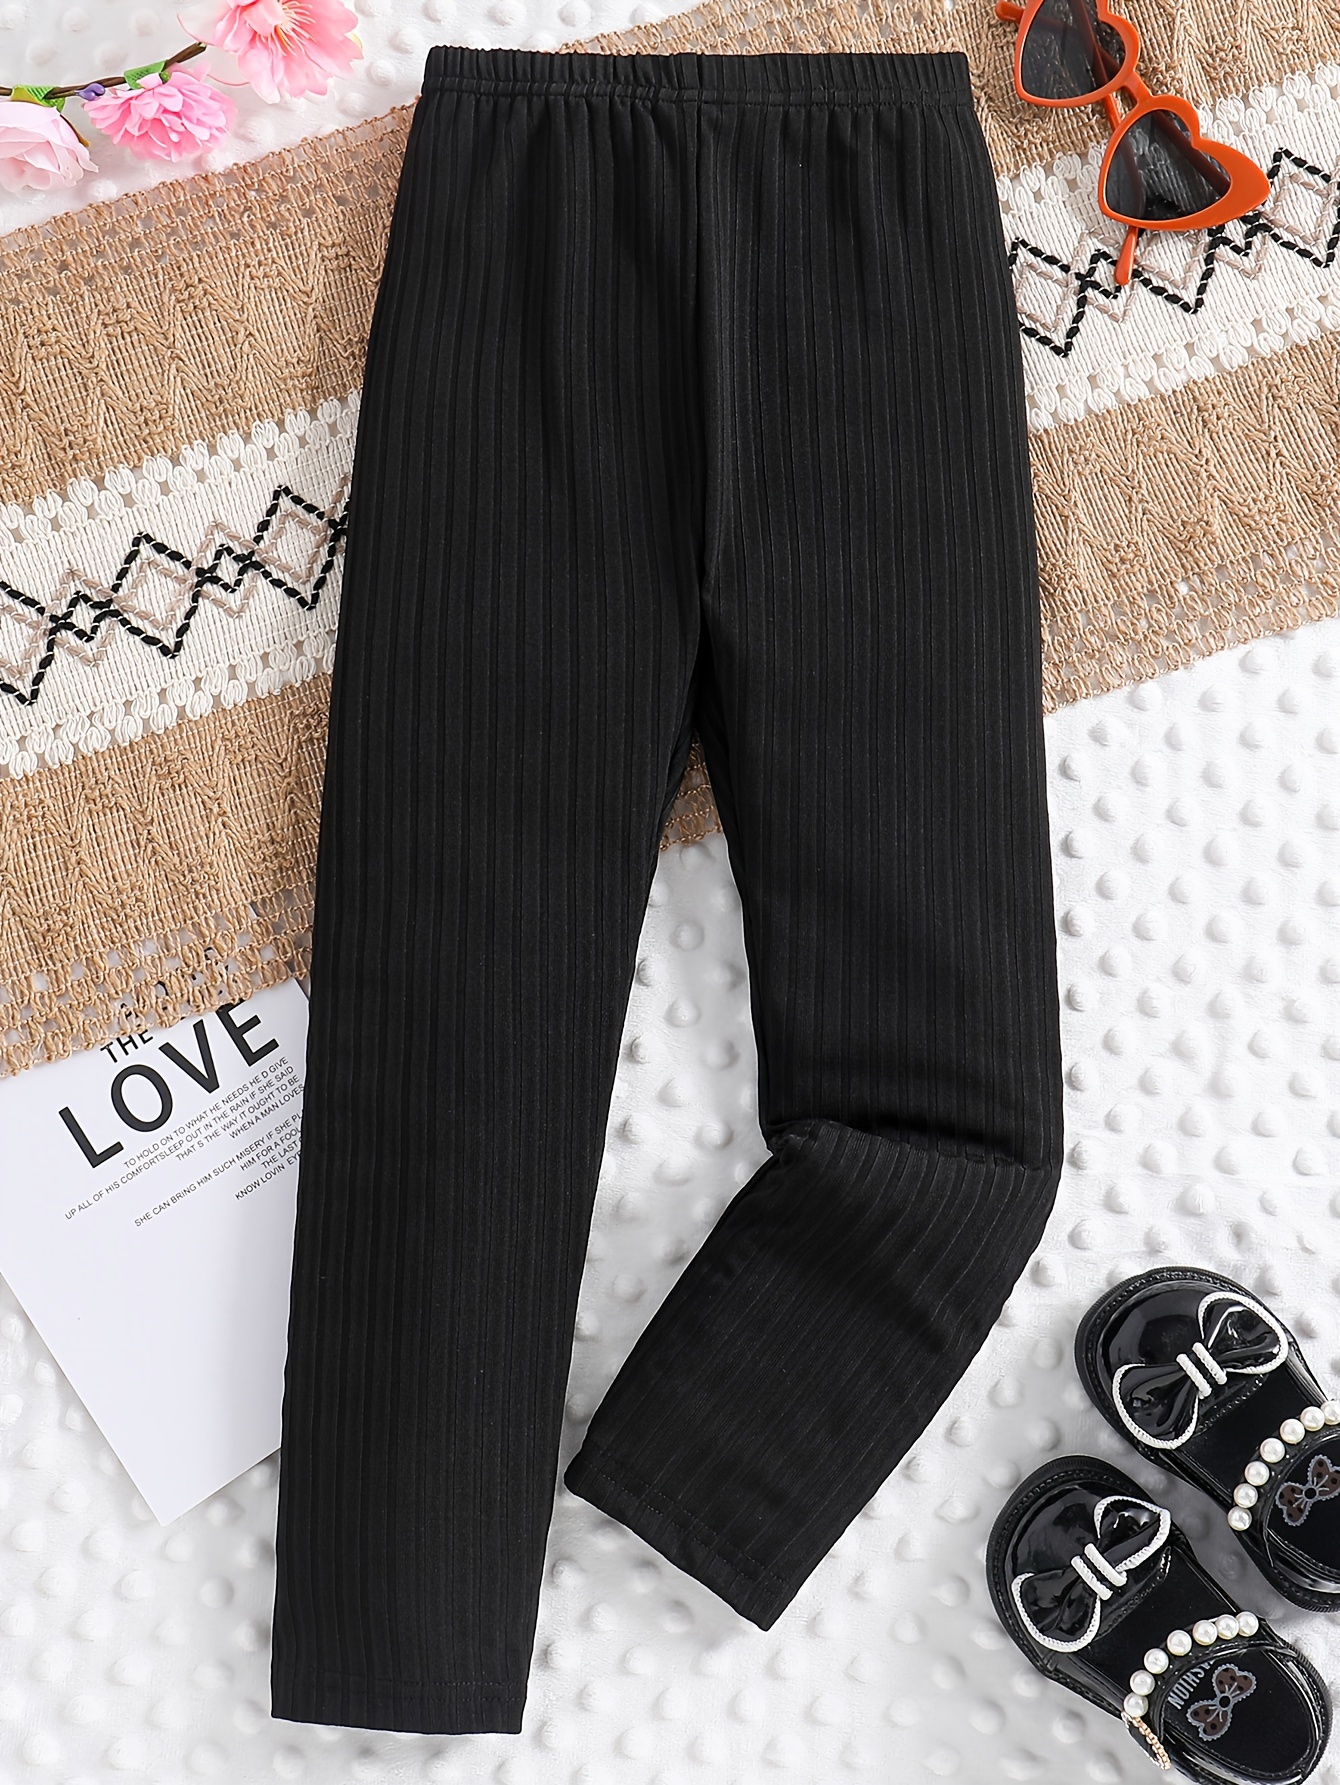 2 Pcs Cute & Casual Leggings With Bowknot Design Preppy Style For Autumn  And Winter, Sports, Everyday